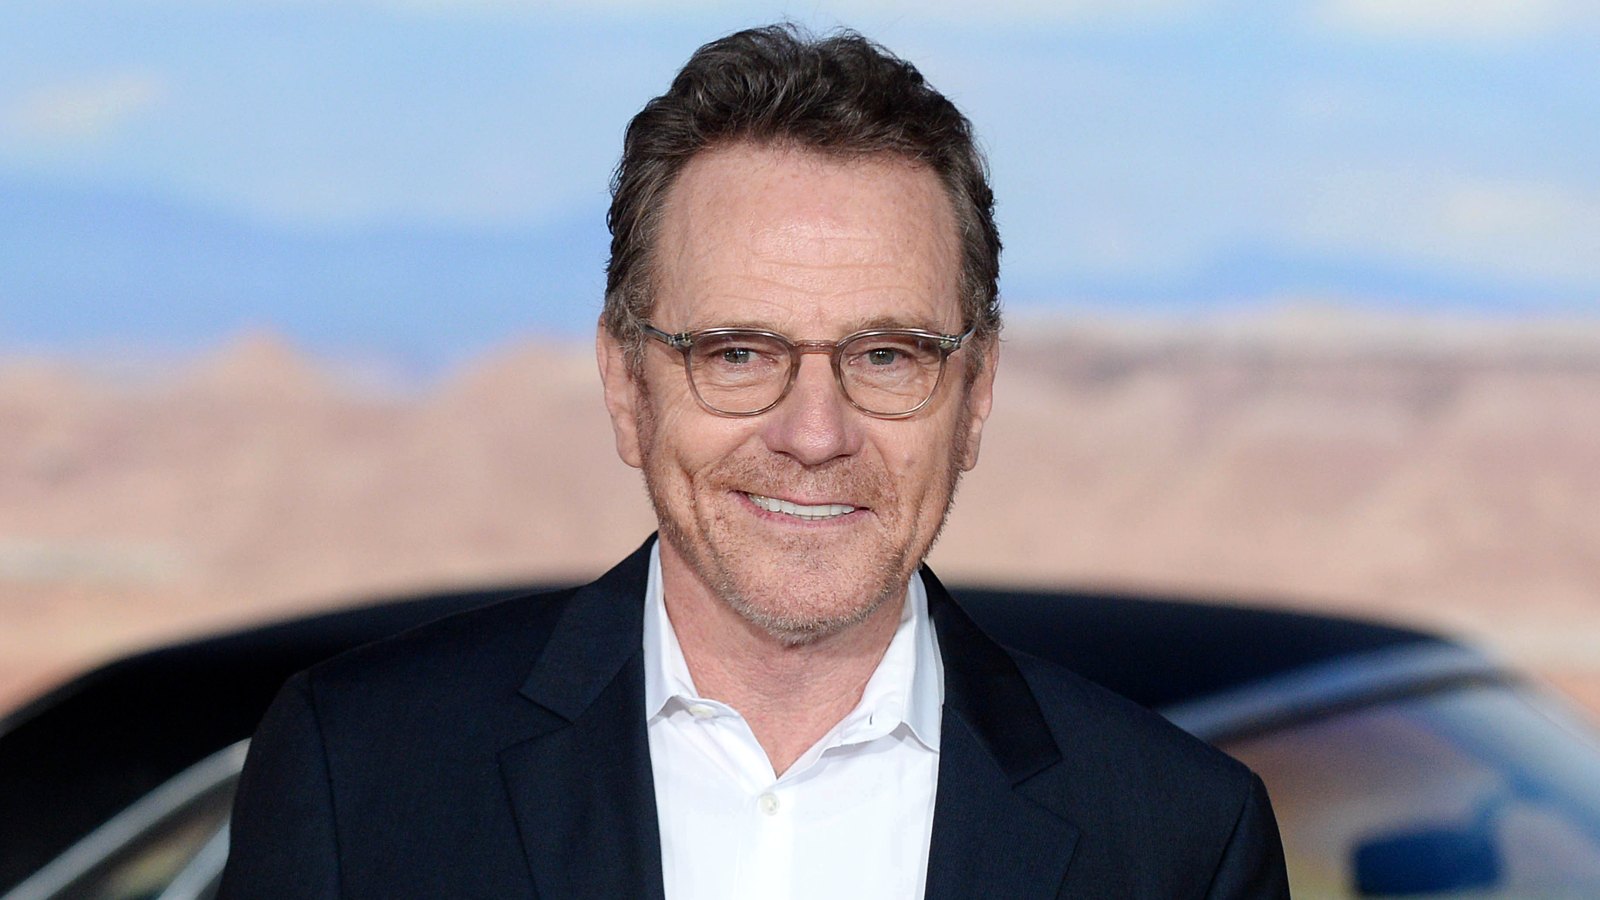 Bryan Cranston I Want to Reprise Walter White Better Call Saul